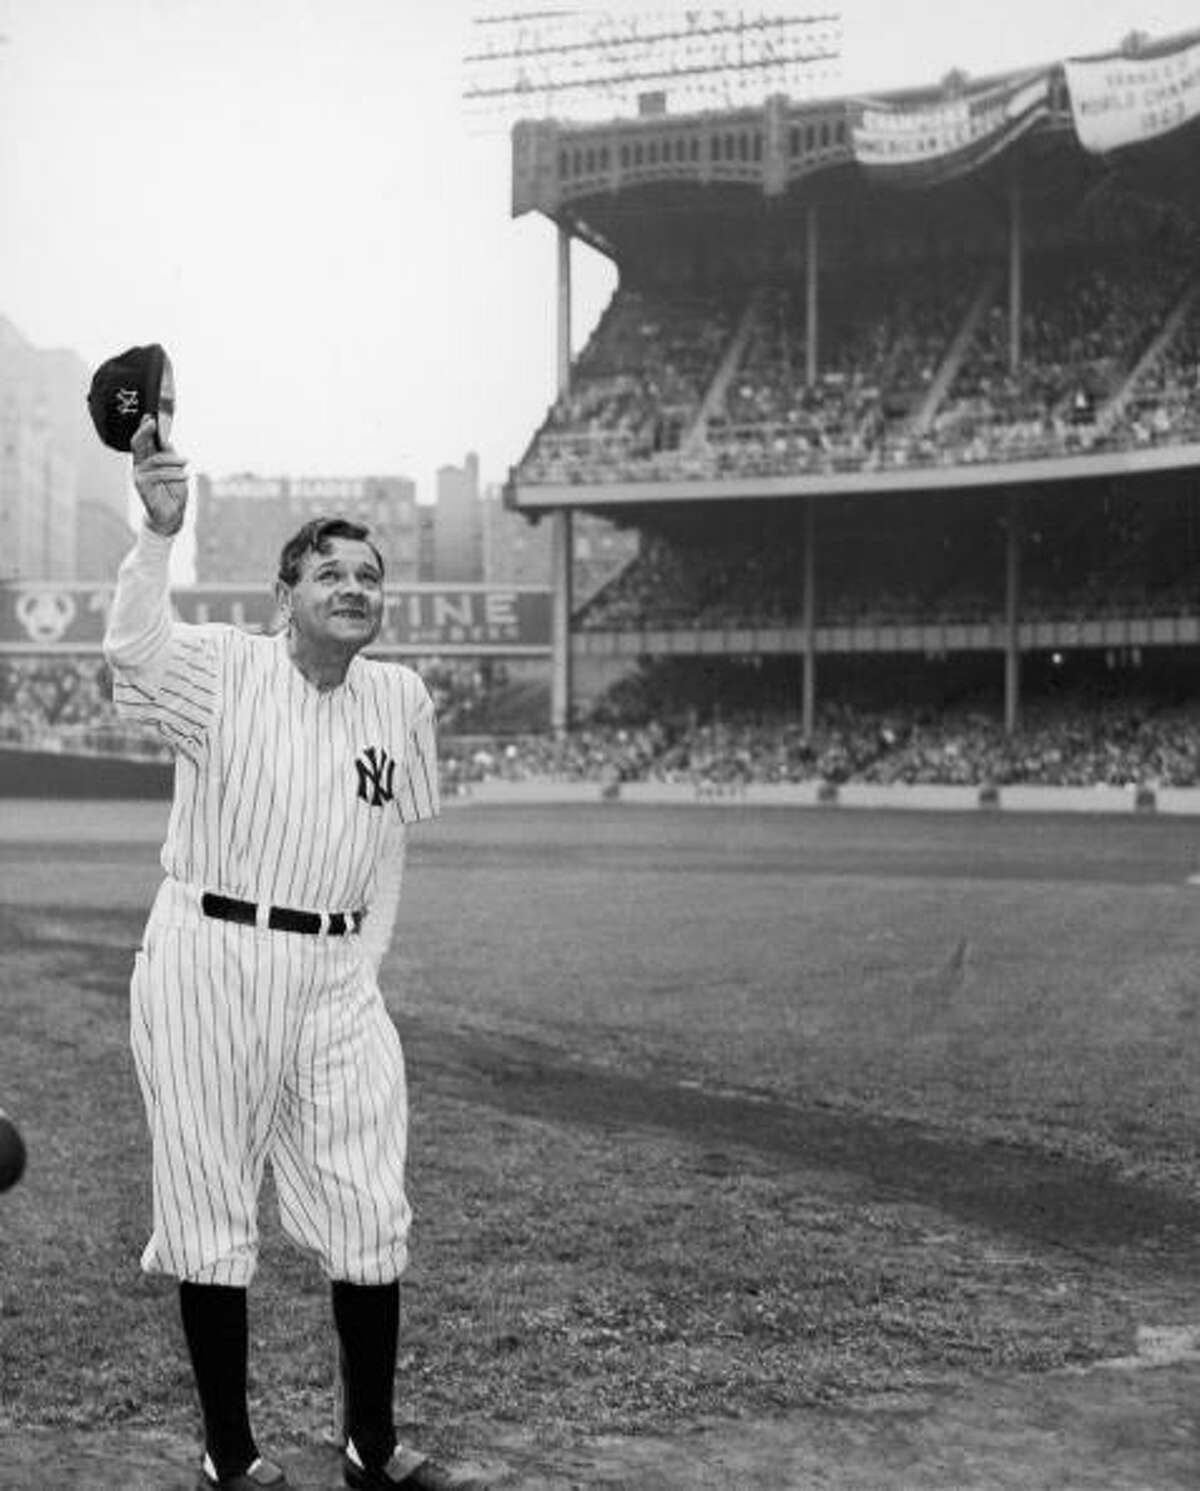 Stadium where Yankees legend Babe Ruth played on verge of being